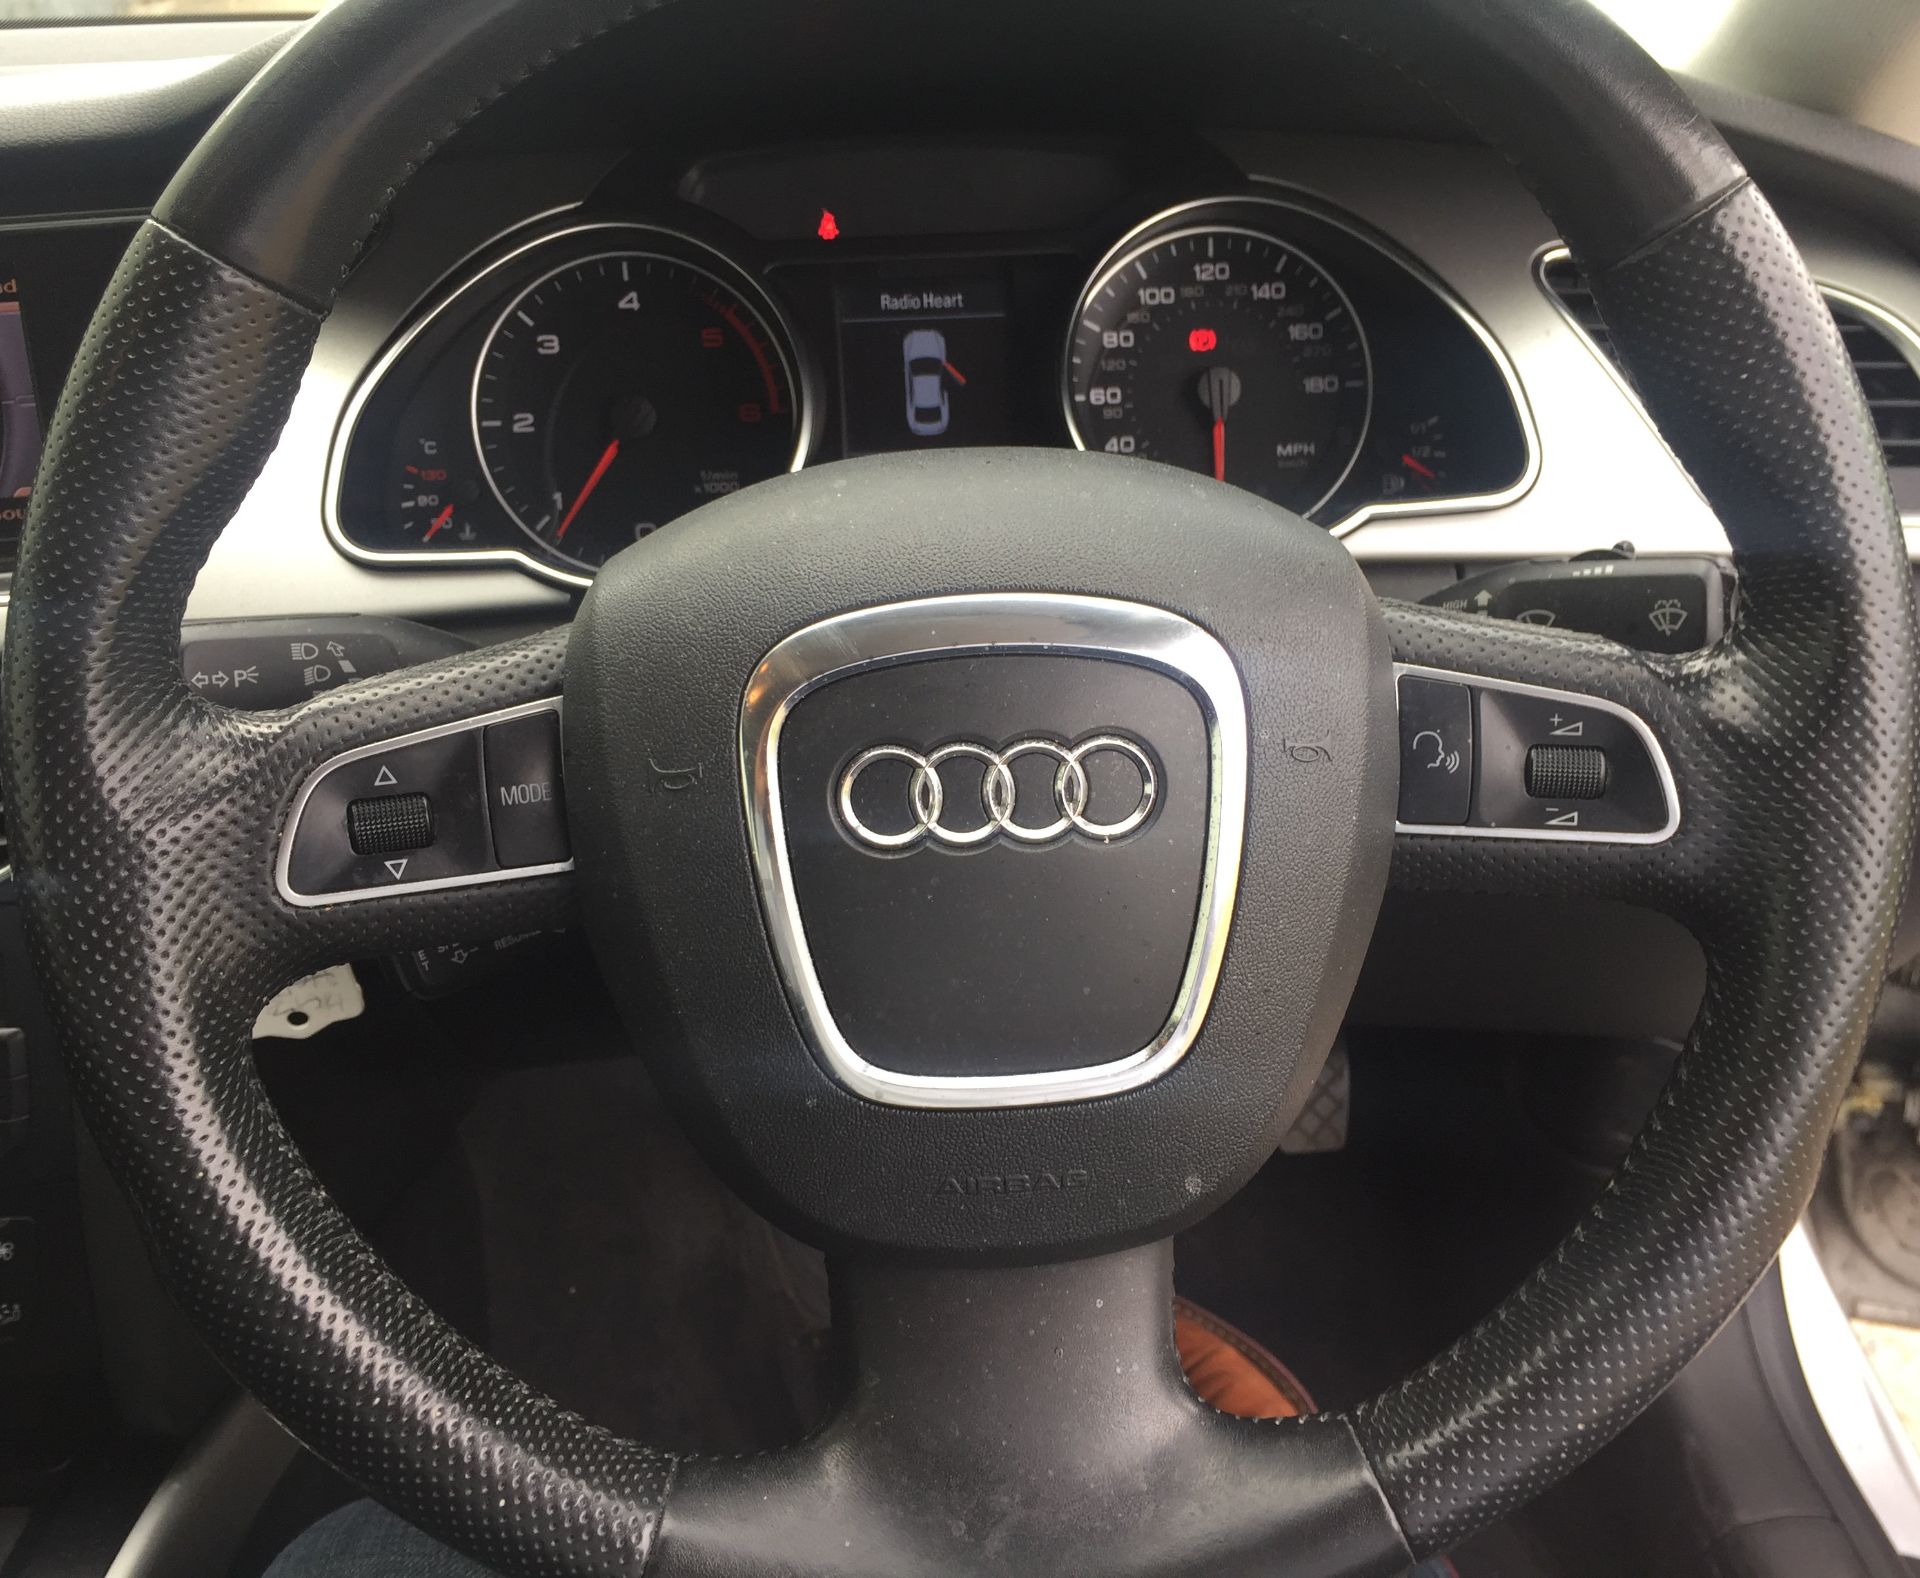 2010 Audi A5 2.0 TDI SE 2 Dr Coupe - CL505 - NO VAT ON THE HAMMER - Location: - Image 10 of 15